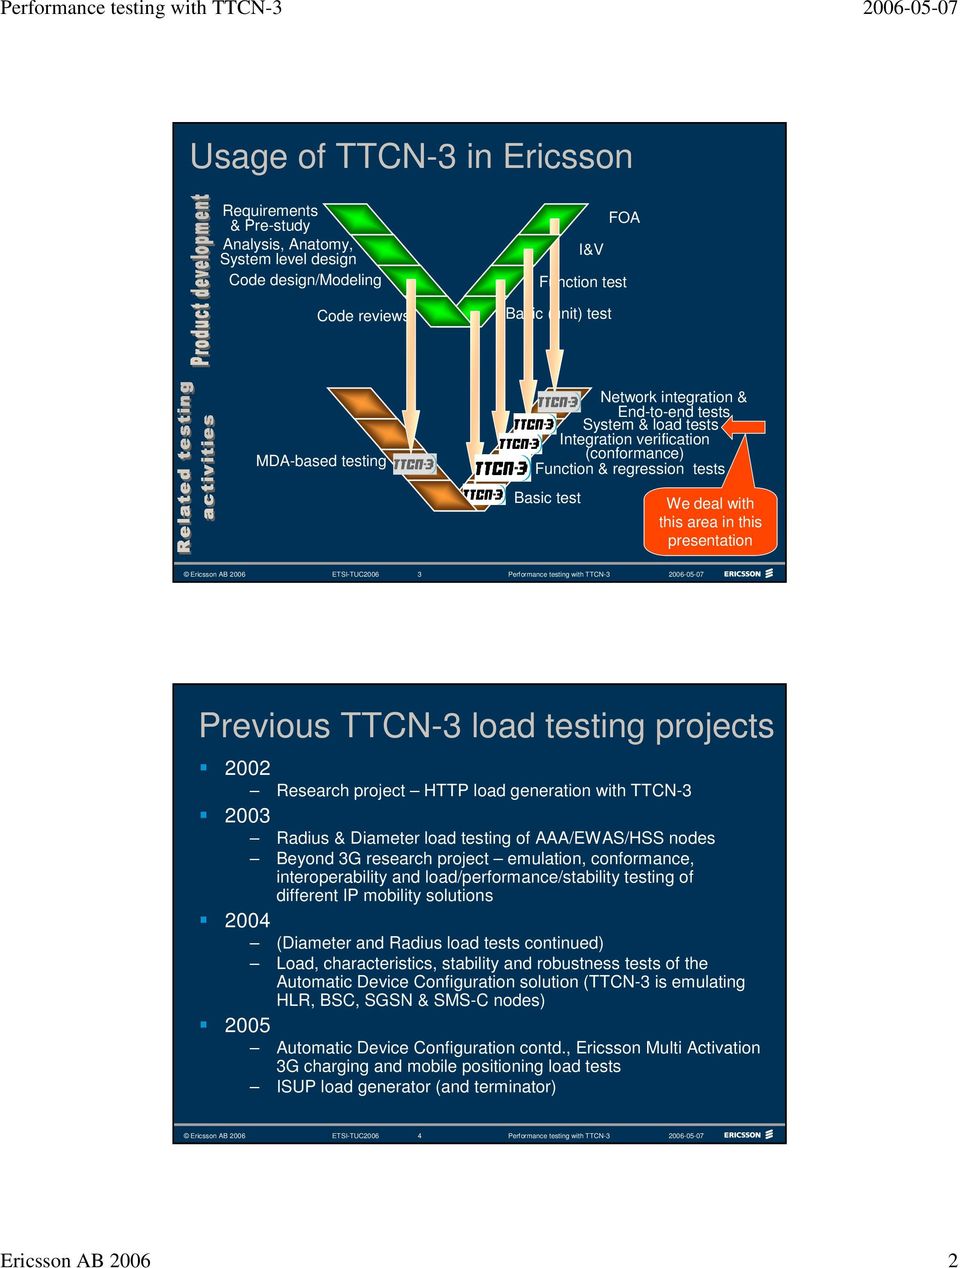 ETSI-TUC2006 3 Previous TTCN-3 load testing projects 2002 Research project HTTP load generation with TTCN-3 2003 Radius & Diameter load testing of AAA/EWAS/HSS nodes Beyond 3G research project